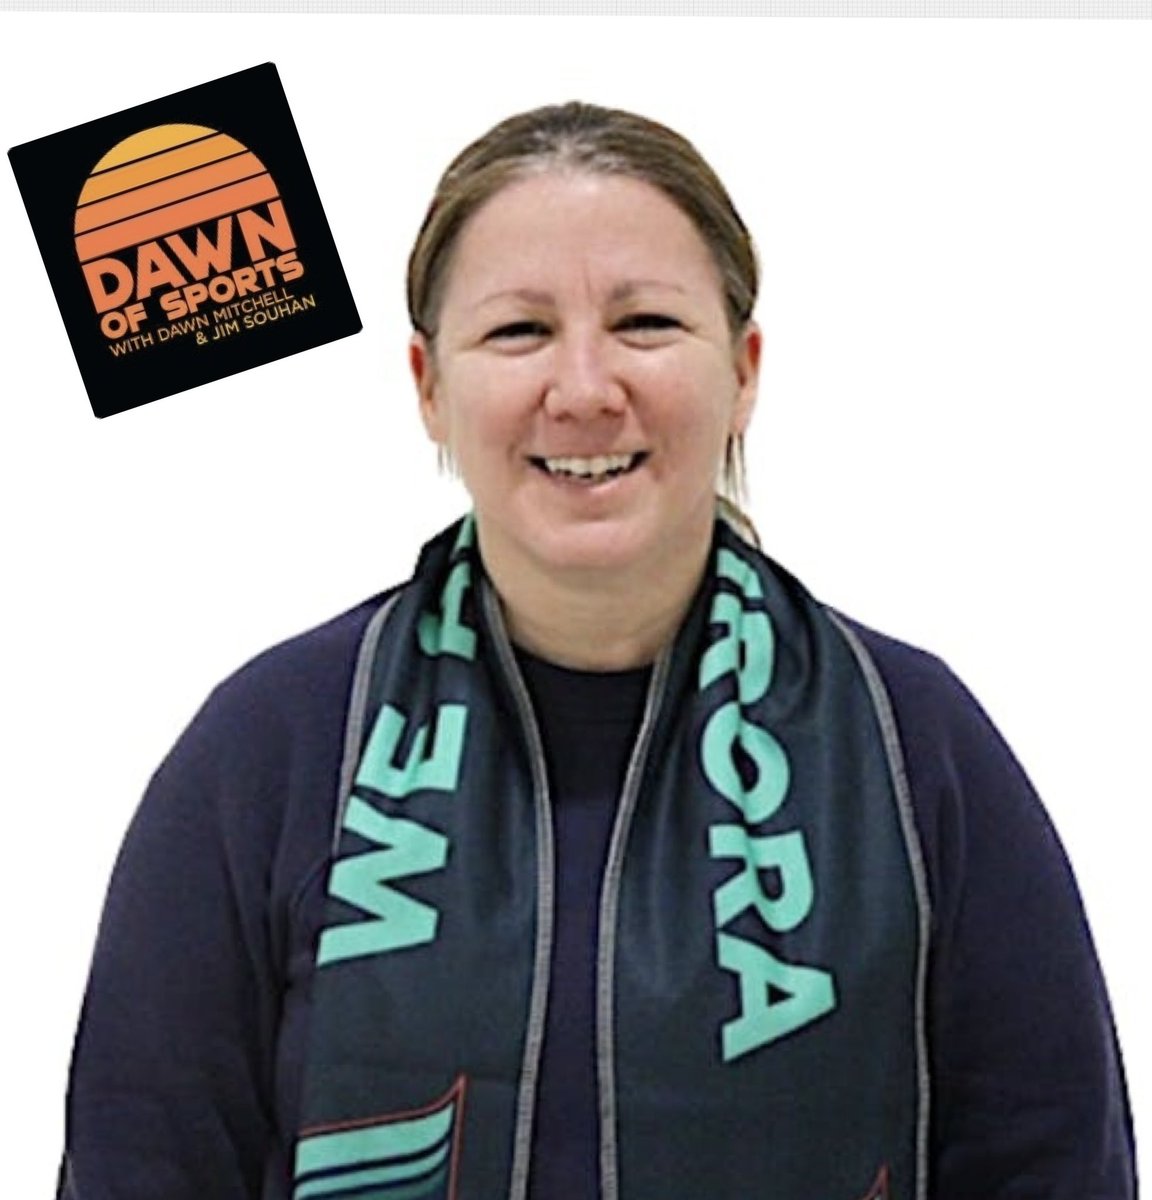 The latest episode of “Dawn of Sports” were joined by @MNAuroraFC Sporting Director/Head Coach Colette Montgomery. Aurora starts back up in May! Also @SouhanStrib & I speak on the crazy week in MN sports Timberwolves-NFL Draft & more! Thank you Colette! dawnofsports.podbean.com/e/vikings-lynx…